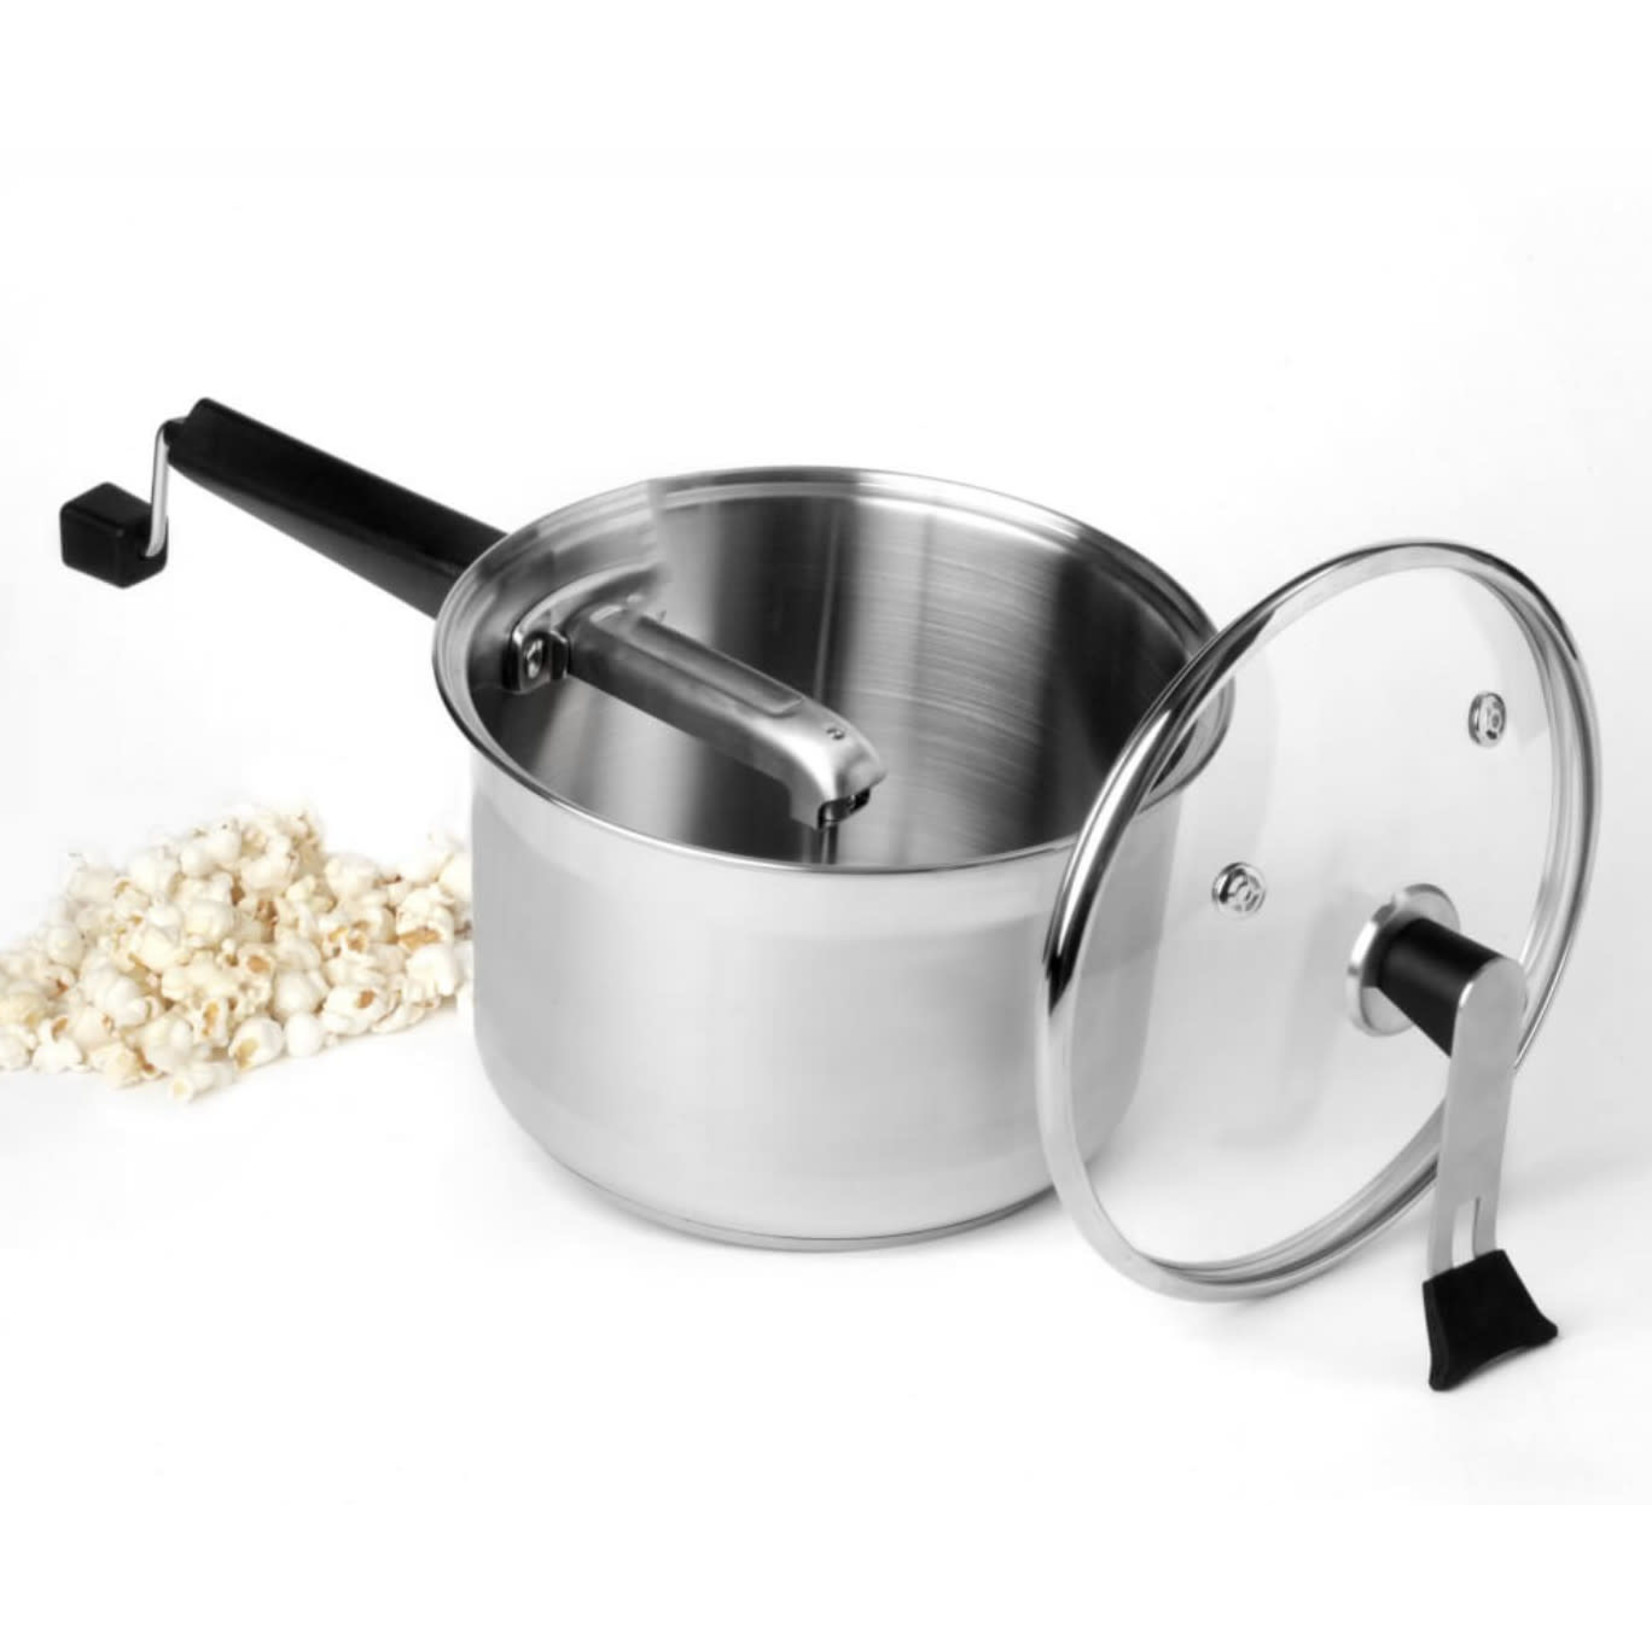 WABASH VALLEY FARMS WABASH VALLEY FARMS Platinum Popcorn Popper - Stainless